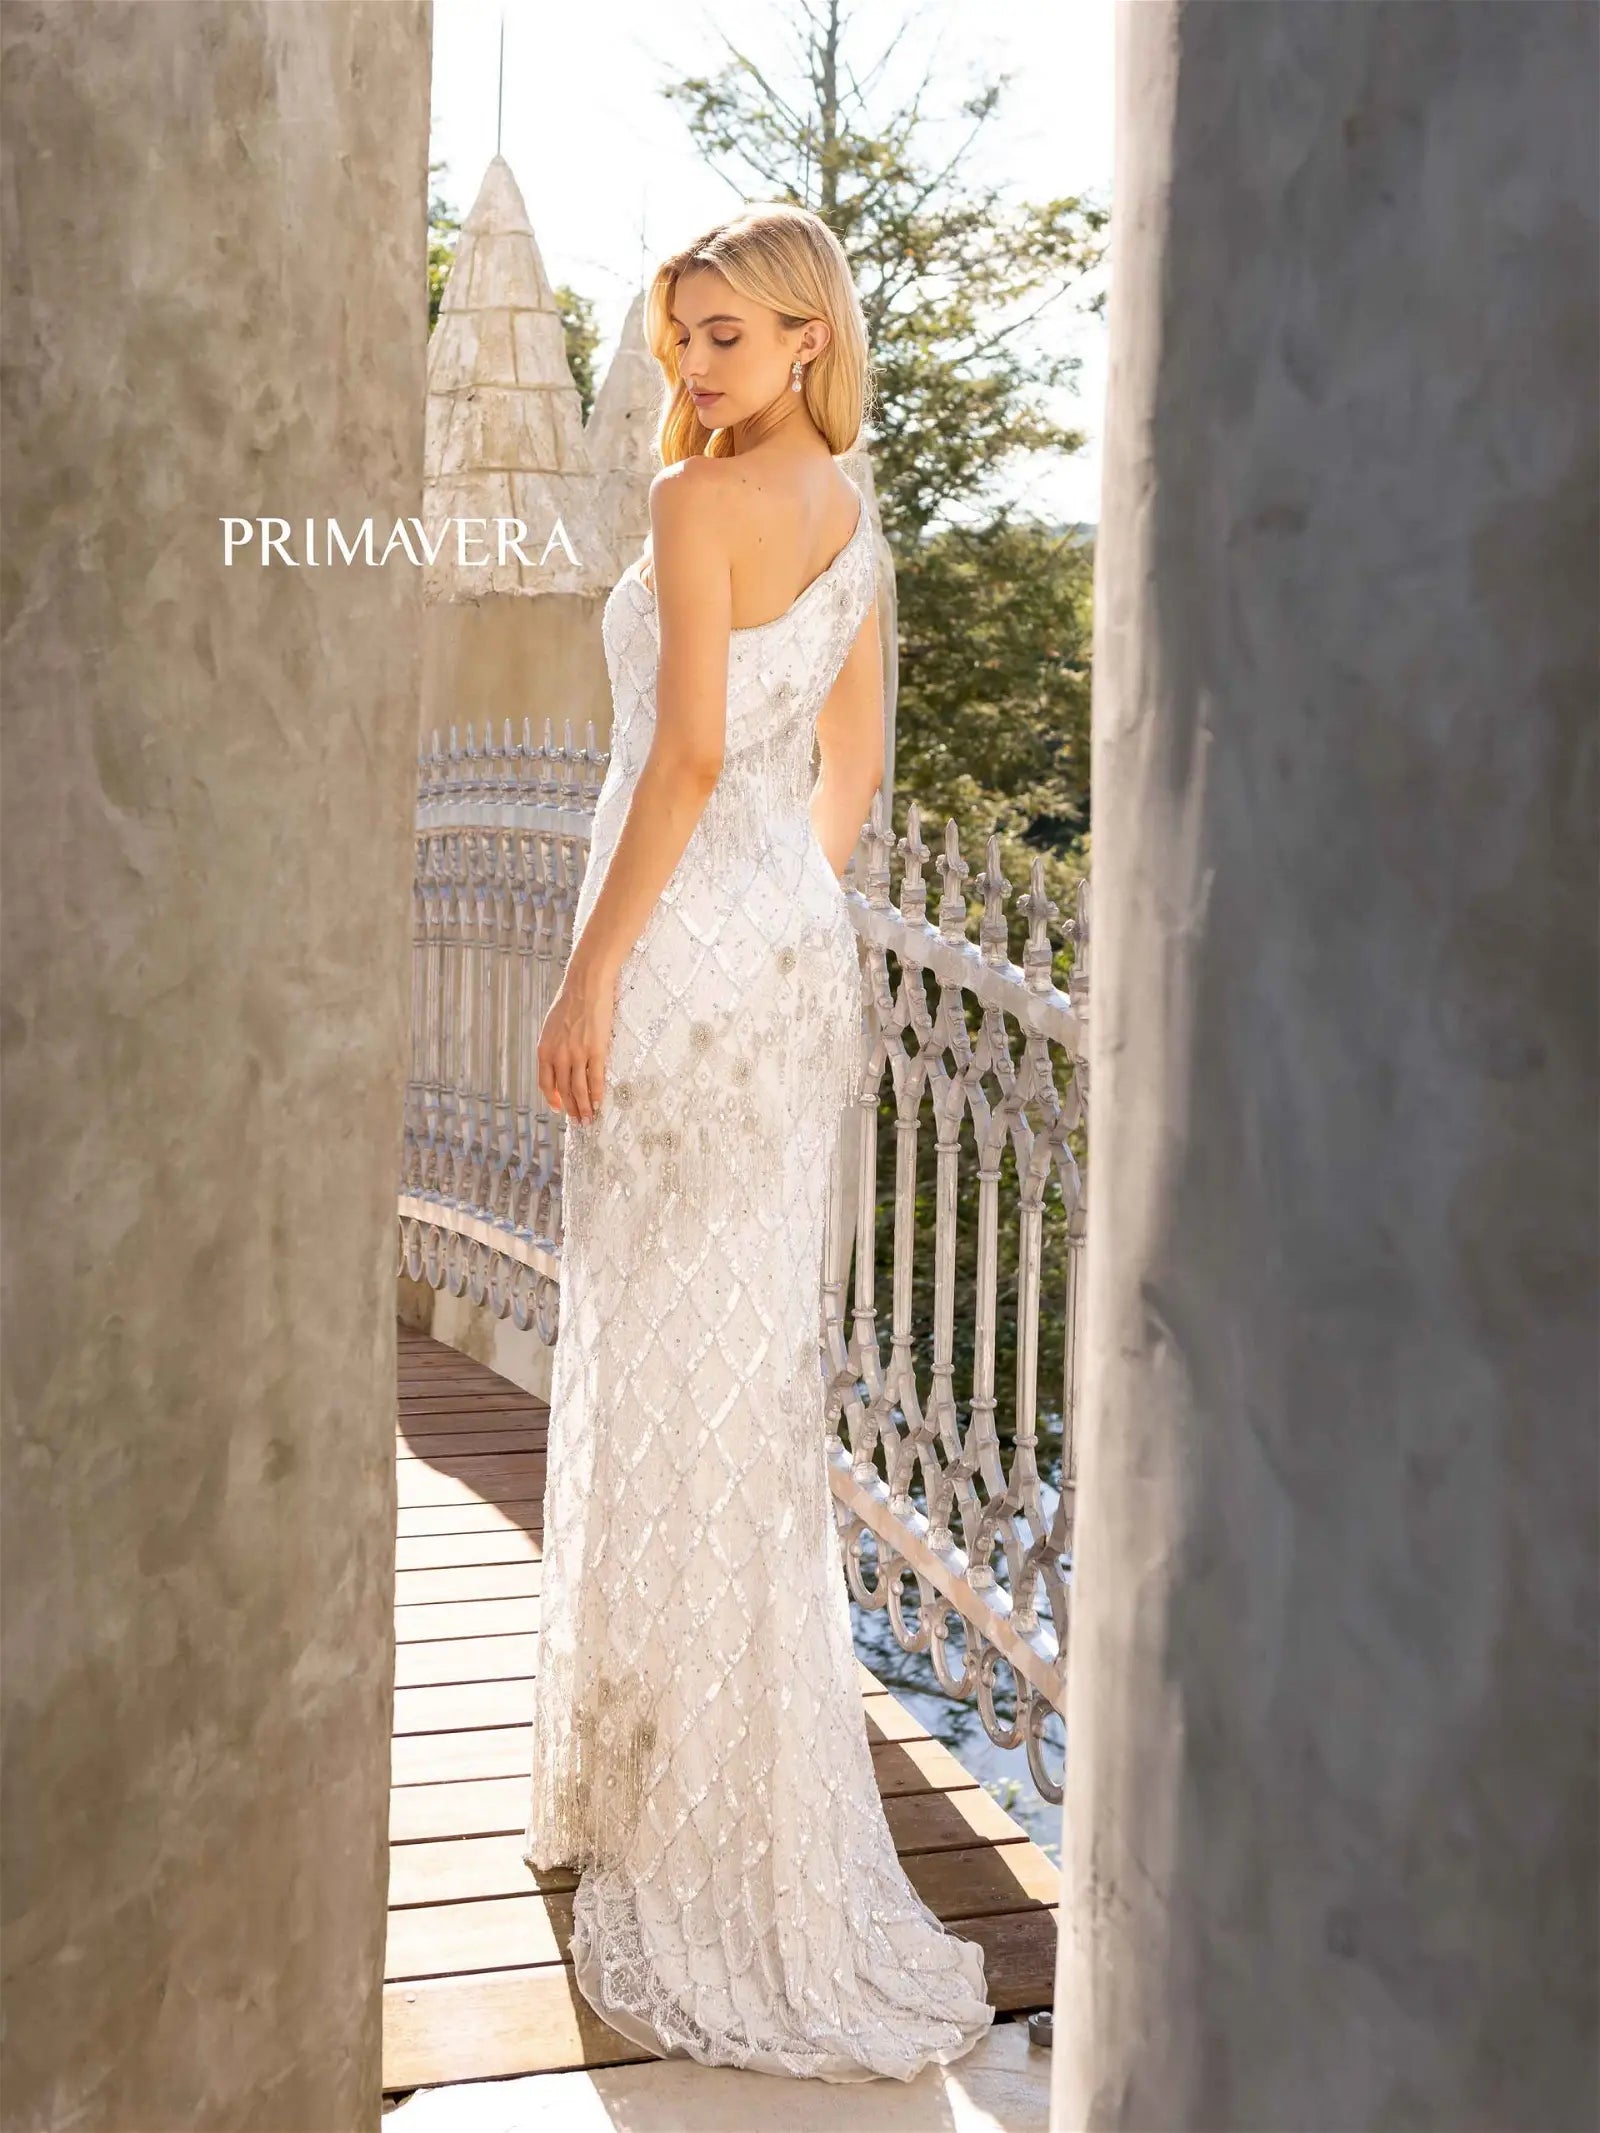 Primavera Couture 12051 Prom Dress Long Beaded Dress. This gown is gorgeous with the one shoulder and fringe. 